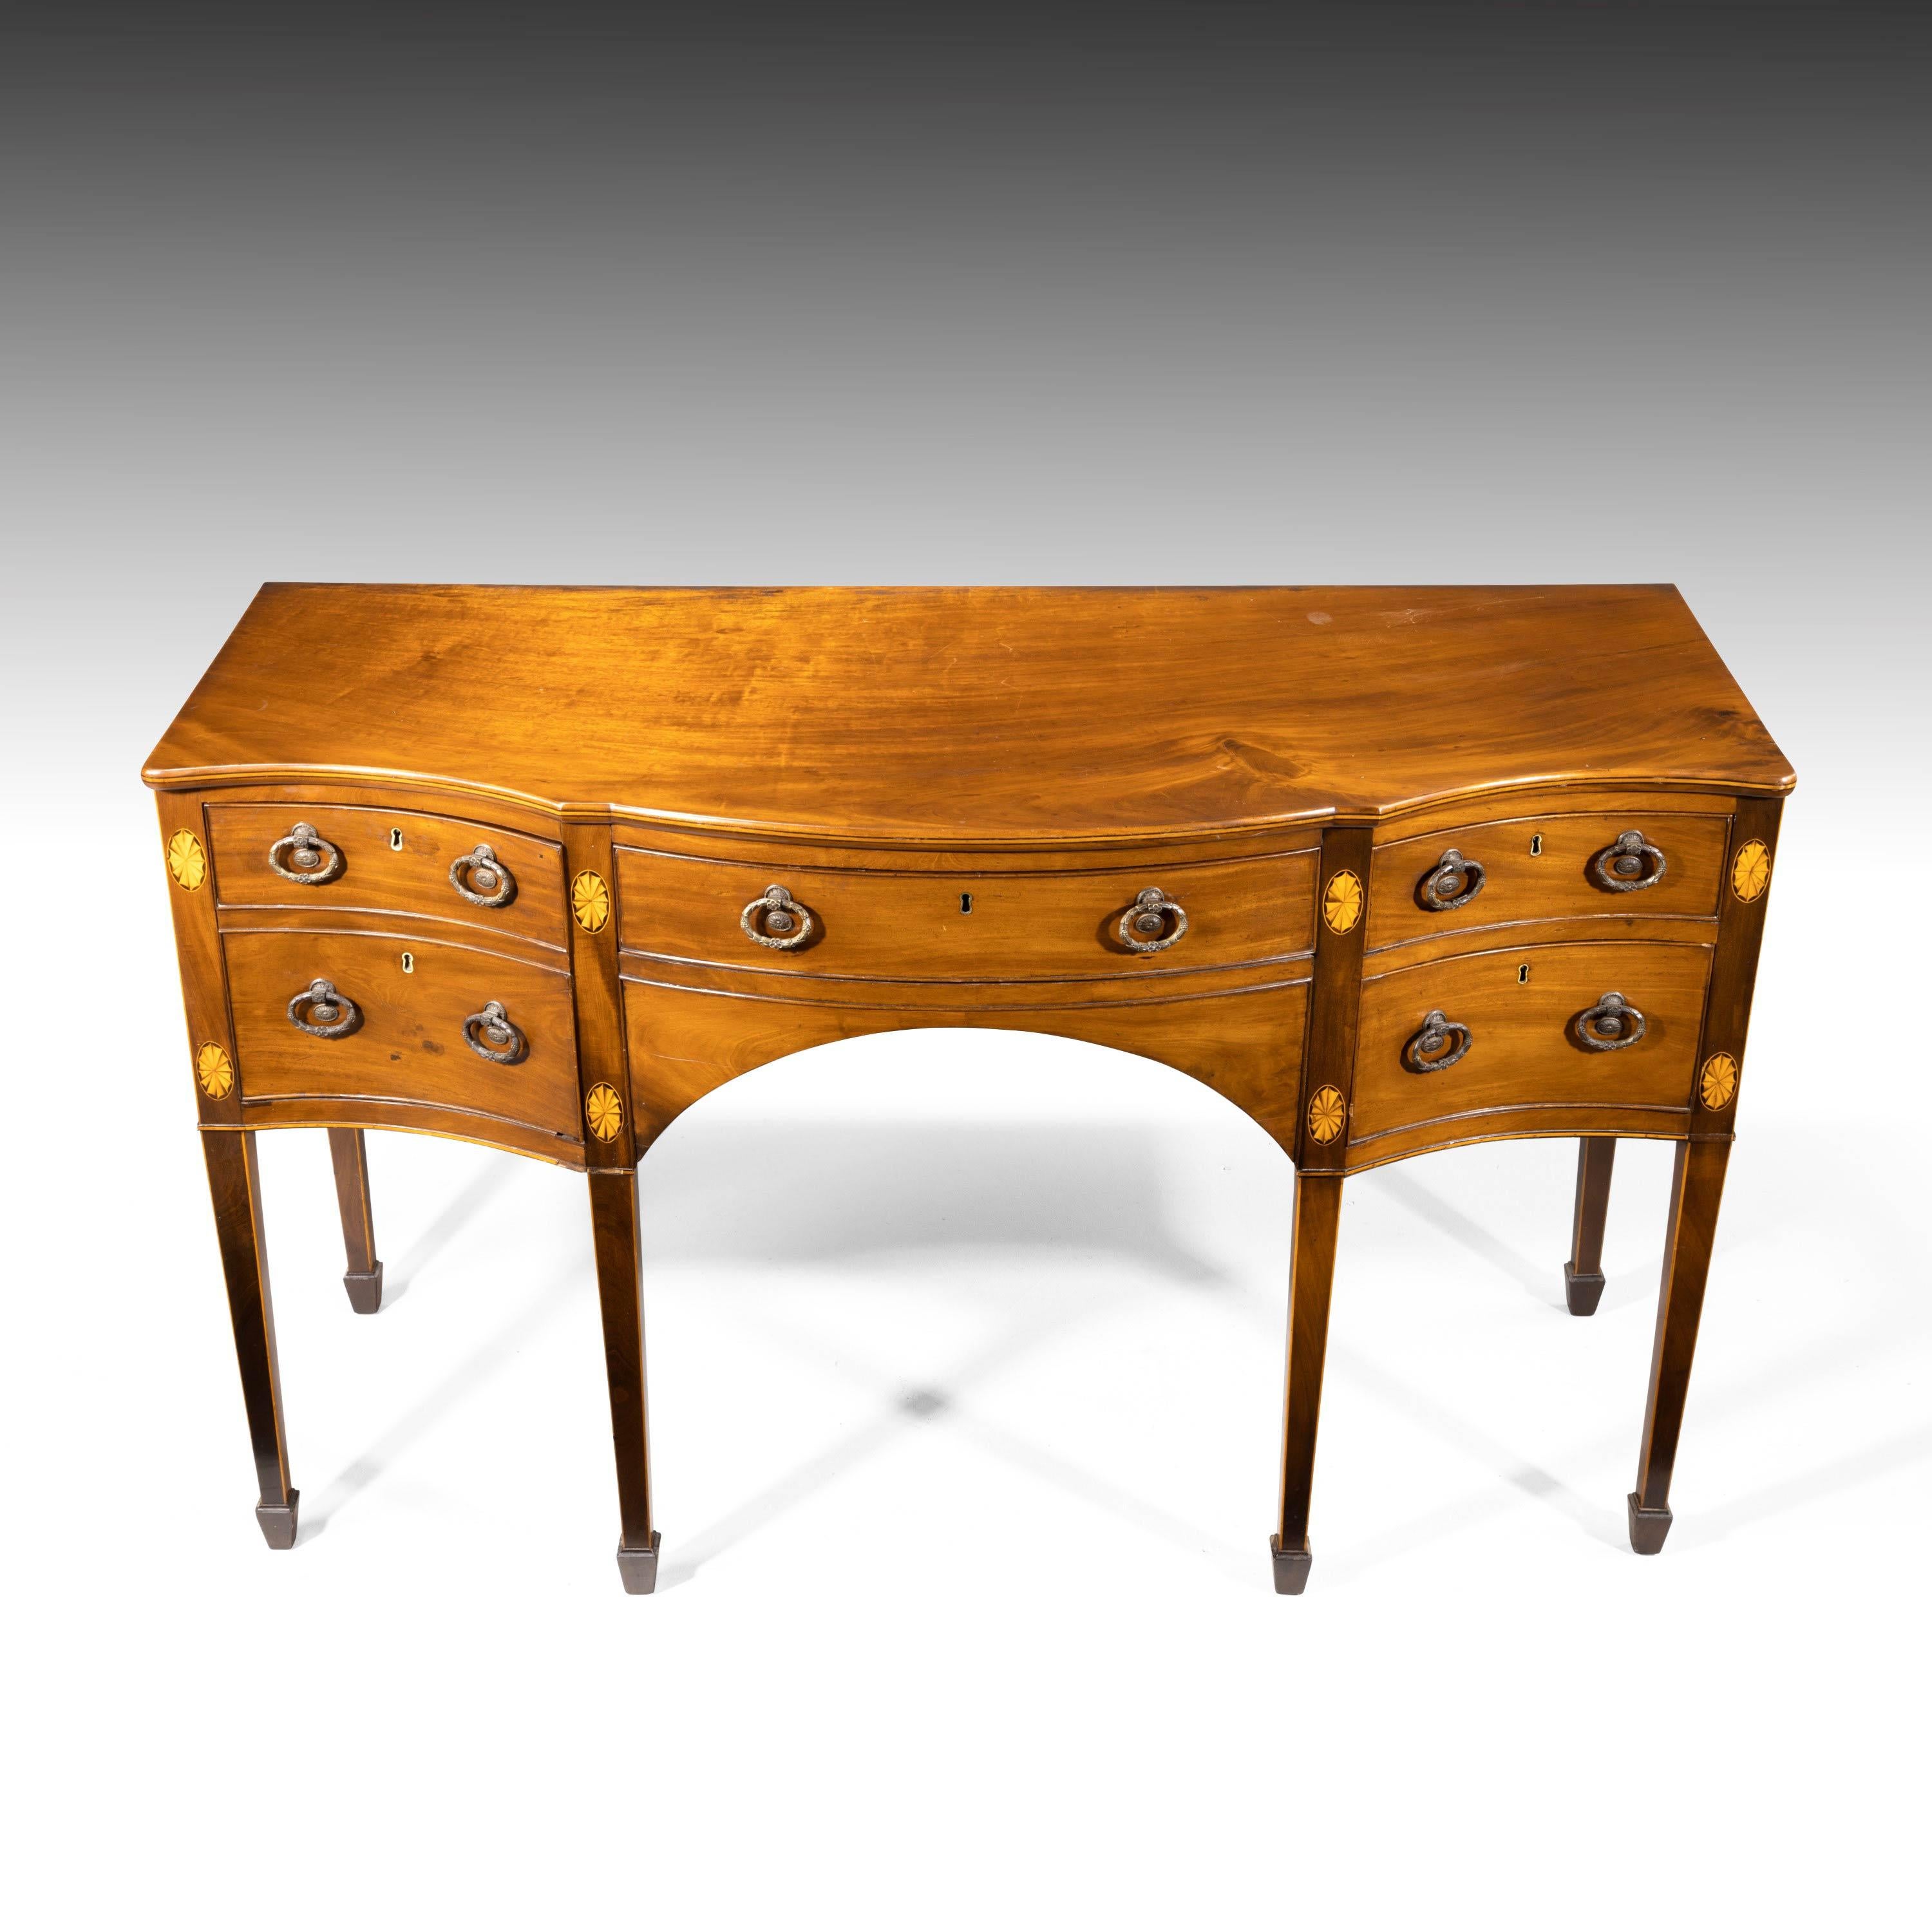 Ascribed to Gillows of Lancaster, a fine George III period serpentine mahogany sideboard. Of excellent color and patina. The uprights with sunburst inlays to the top and shoulders. Very fine original two-section gilt bronze handles, absolutely